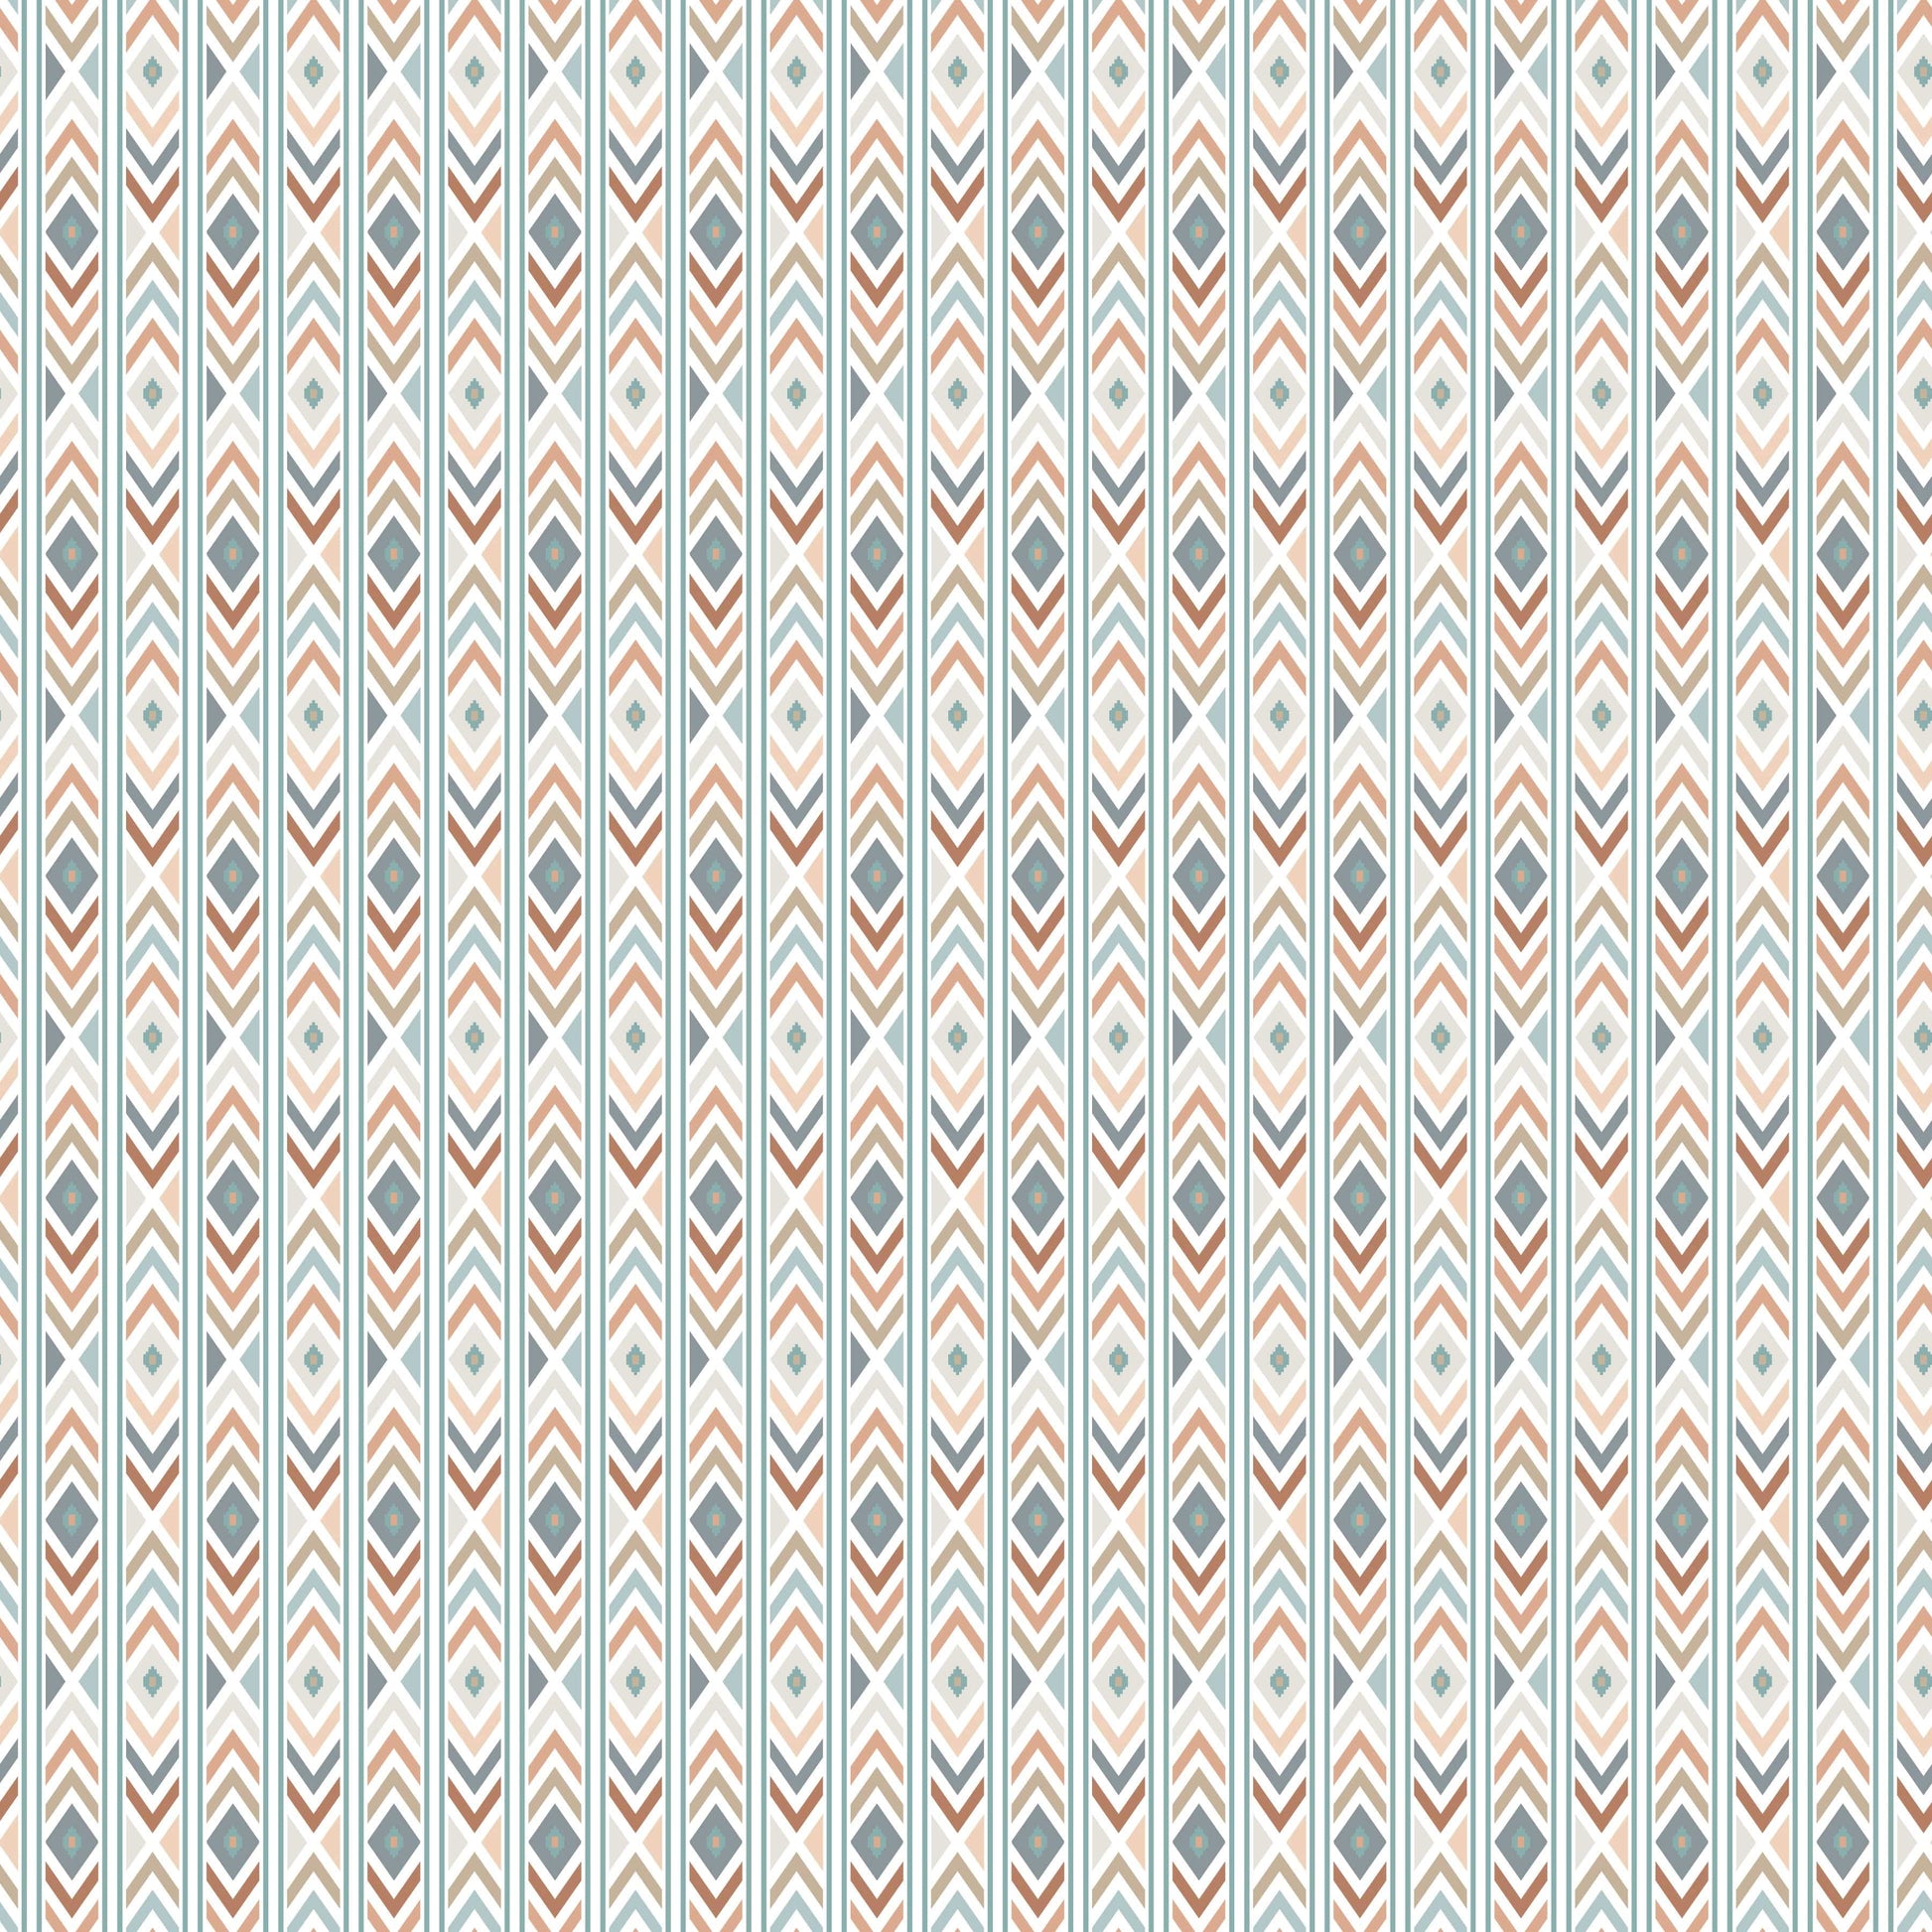 Close-up view of the distinctive Aztec Fusion fabric pattern available at HowdyHo, featuring vertical stripes with intricate geometric designs. The pattern includes a harmonious mix of muted tones that combine cream, soft browns, and blues, creating a sophisticated and timeless print for fashion-forward individuals.